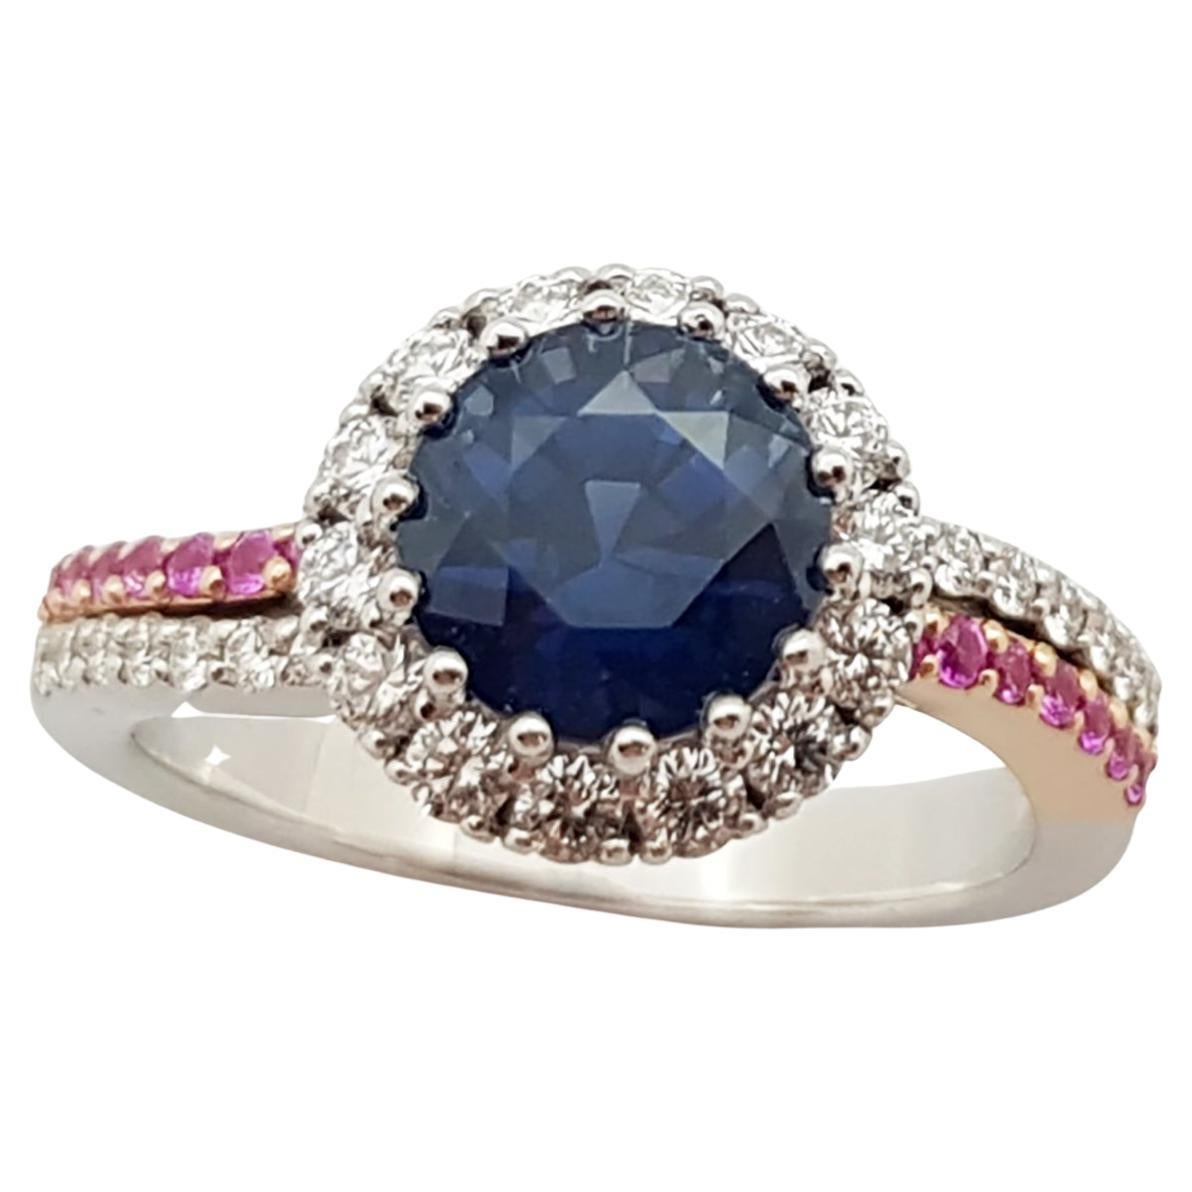 Blue Sapphire, Pink Sapphire and Diamond Engagement Ring Set in 18K White Gold